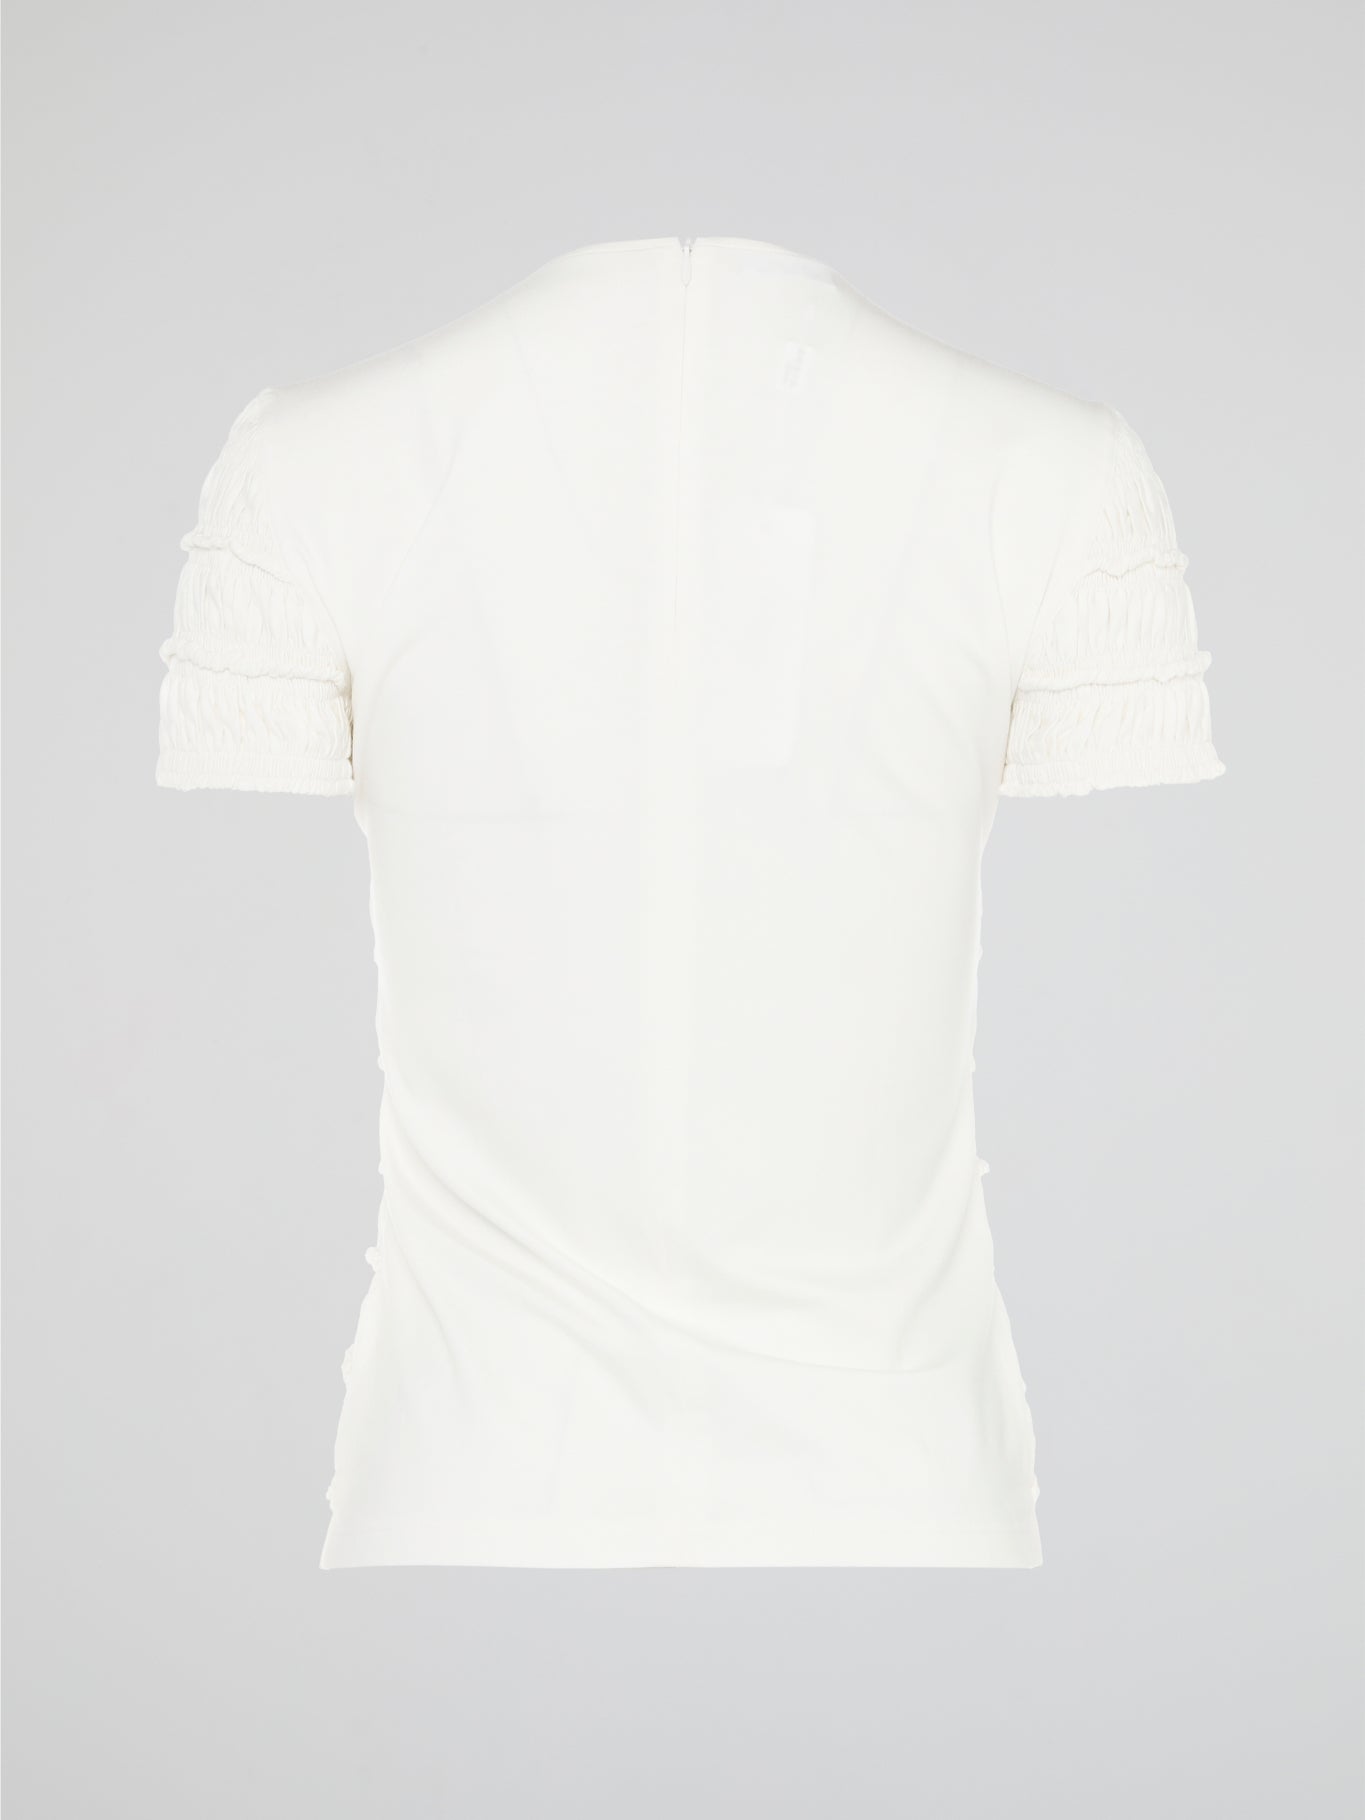 The White Tiered Top from Akris Punto is a captivating blend of sophistication and whimsy. With its unique tiered design, this versatile top adds a playful twist to any outfit. Made from premium materials, it effortlessly drapes to flatter your figure and is perfect for both casual and formal occasions.